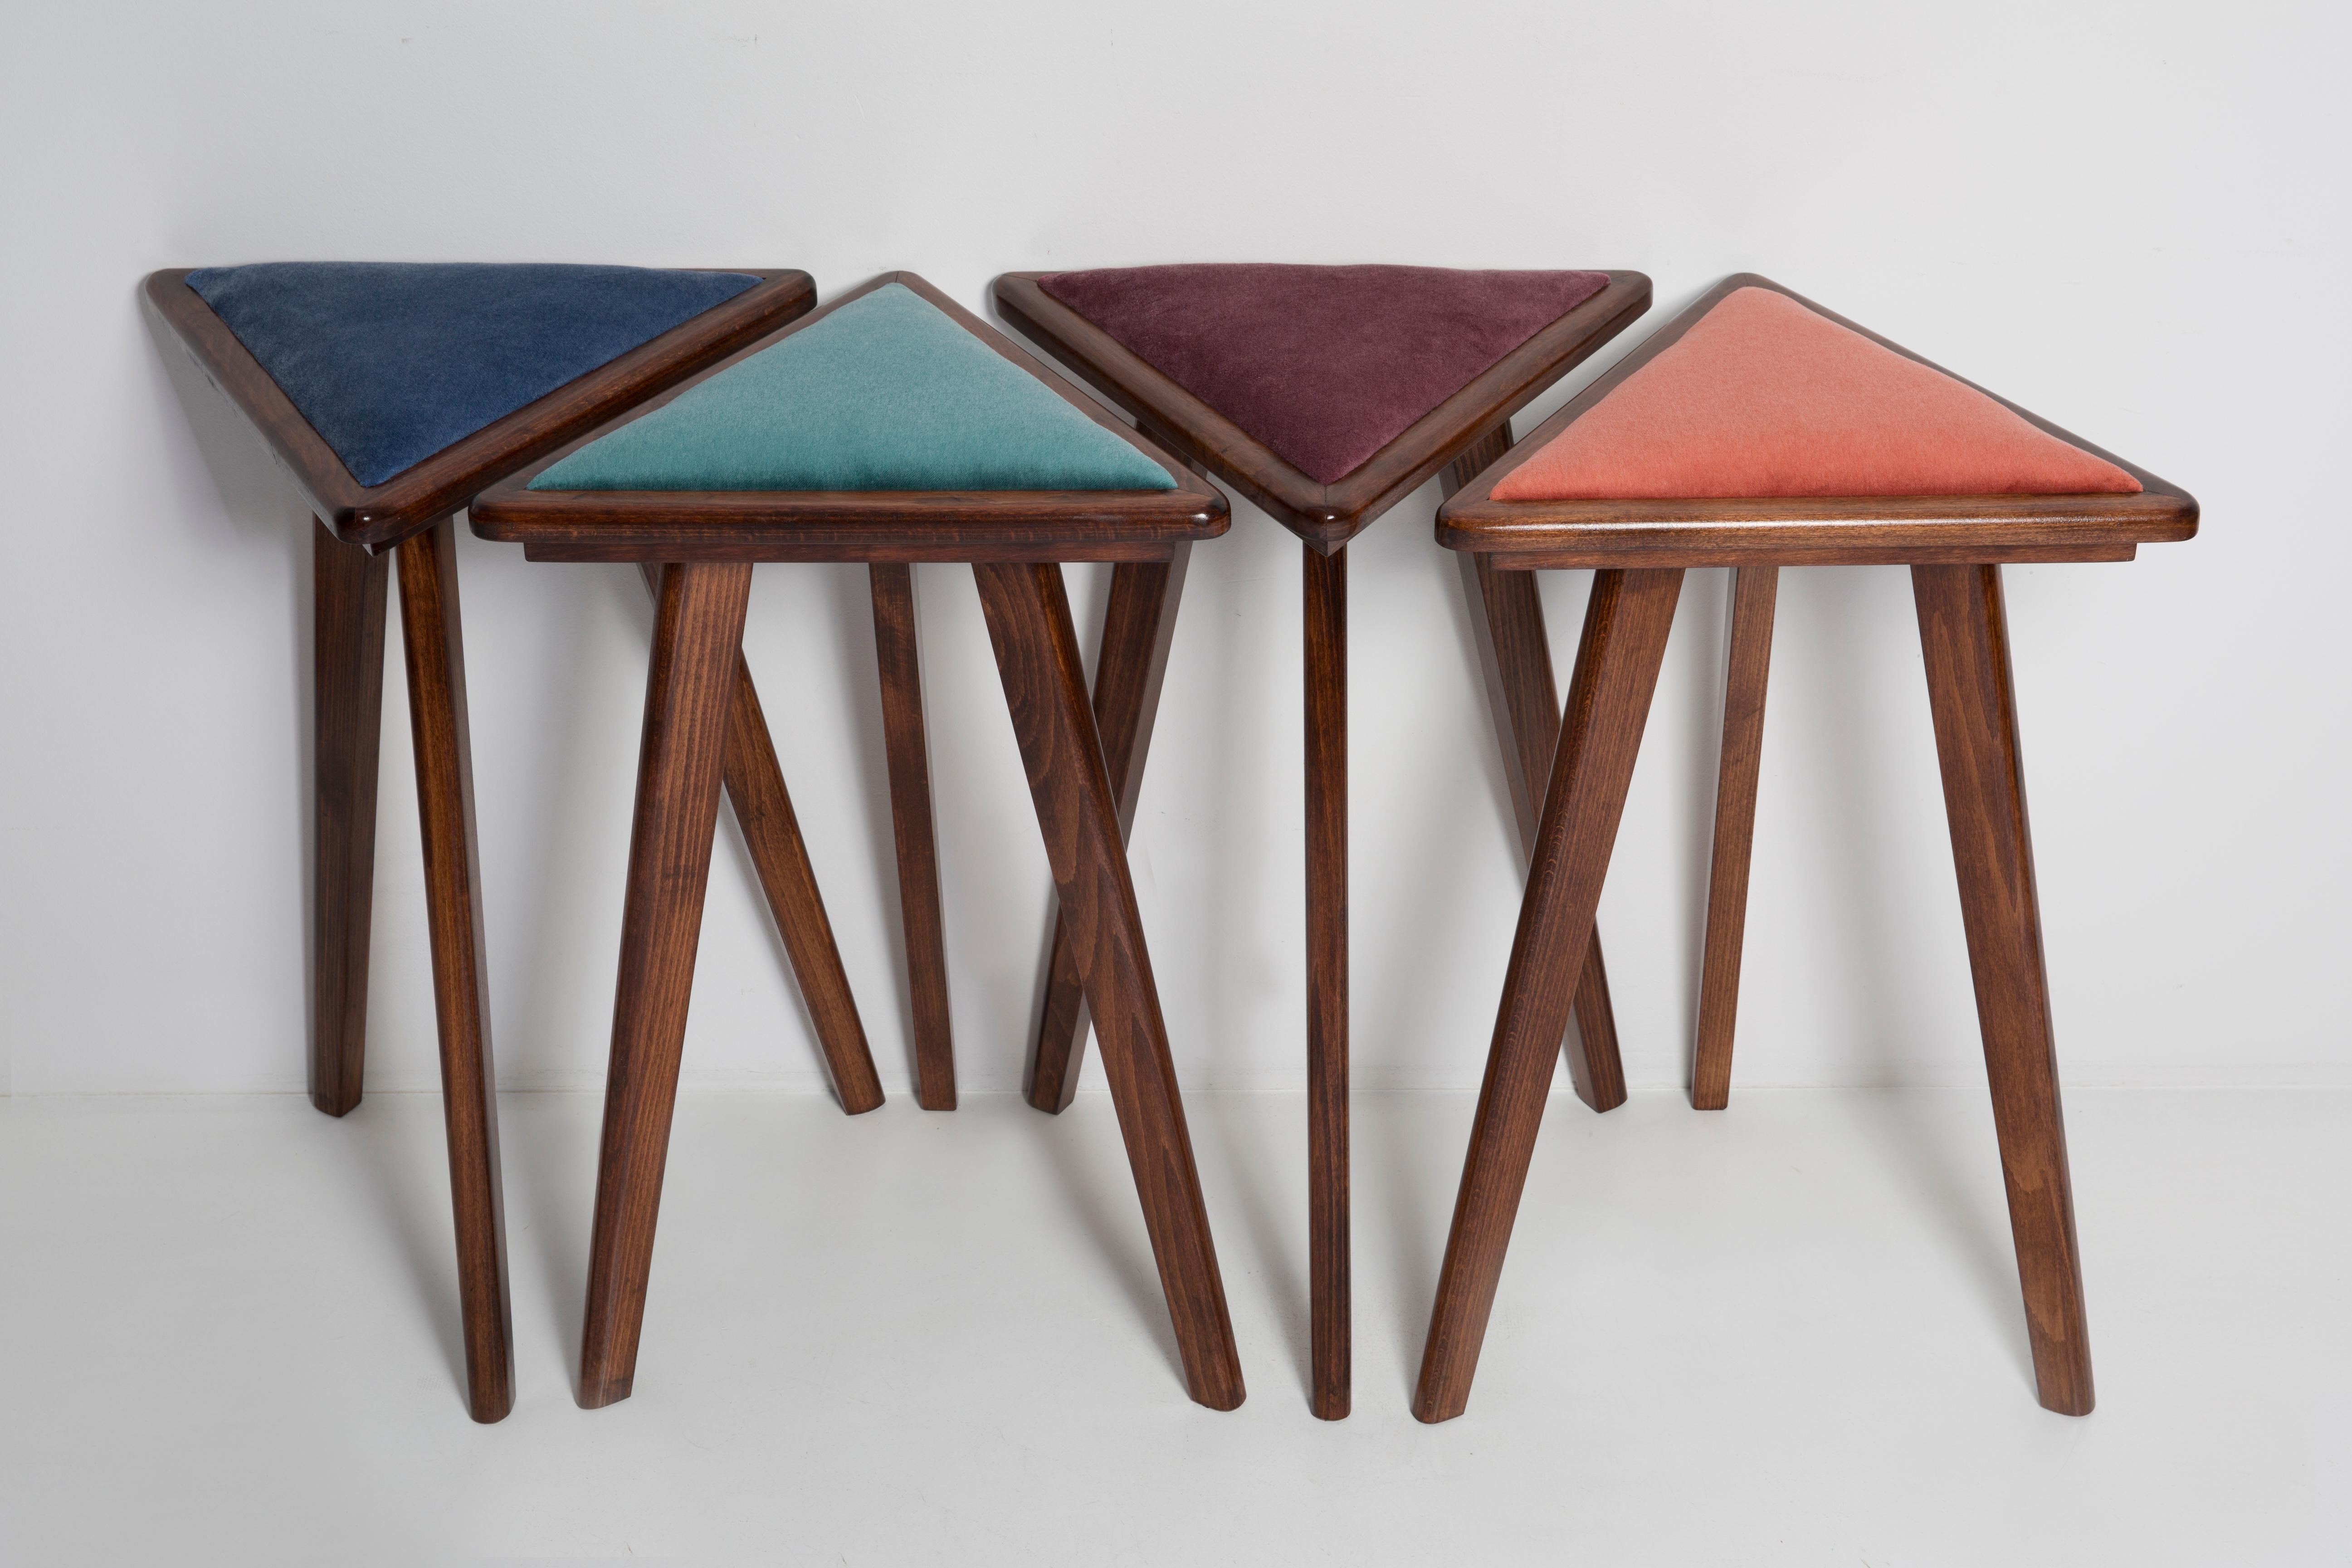 Comfortable and stabile triangle stool.
They are contemporary stools inspired of 1960s style. 
They can be used as a bar stools.

Stool was designed by Vintola Studio, a Polish brand created by Ola Szewczul, designer of vintage interior architecture